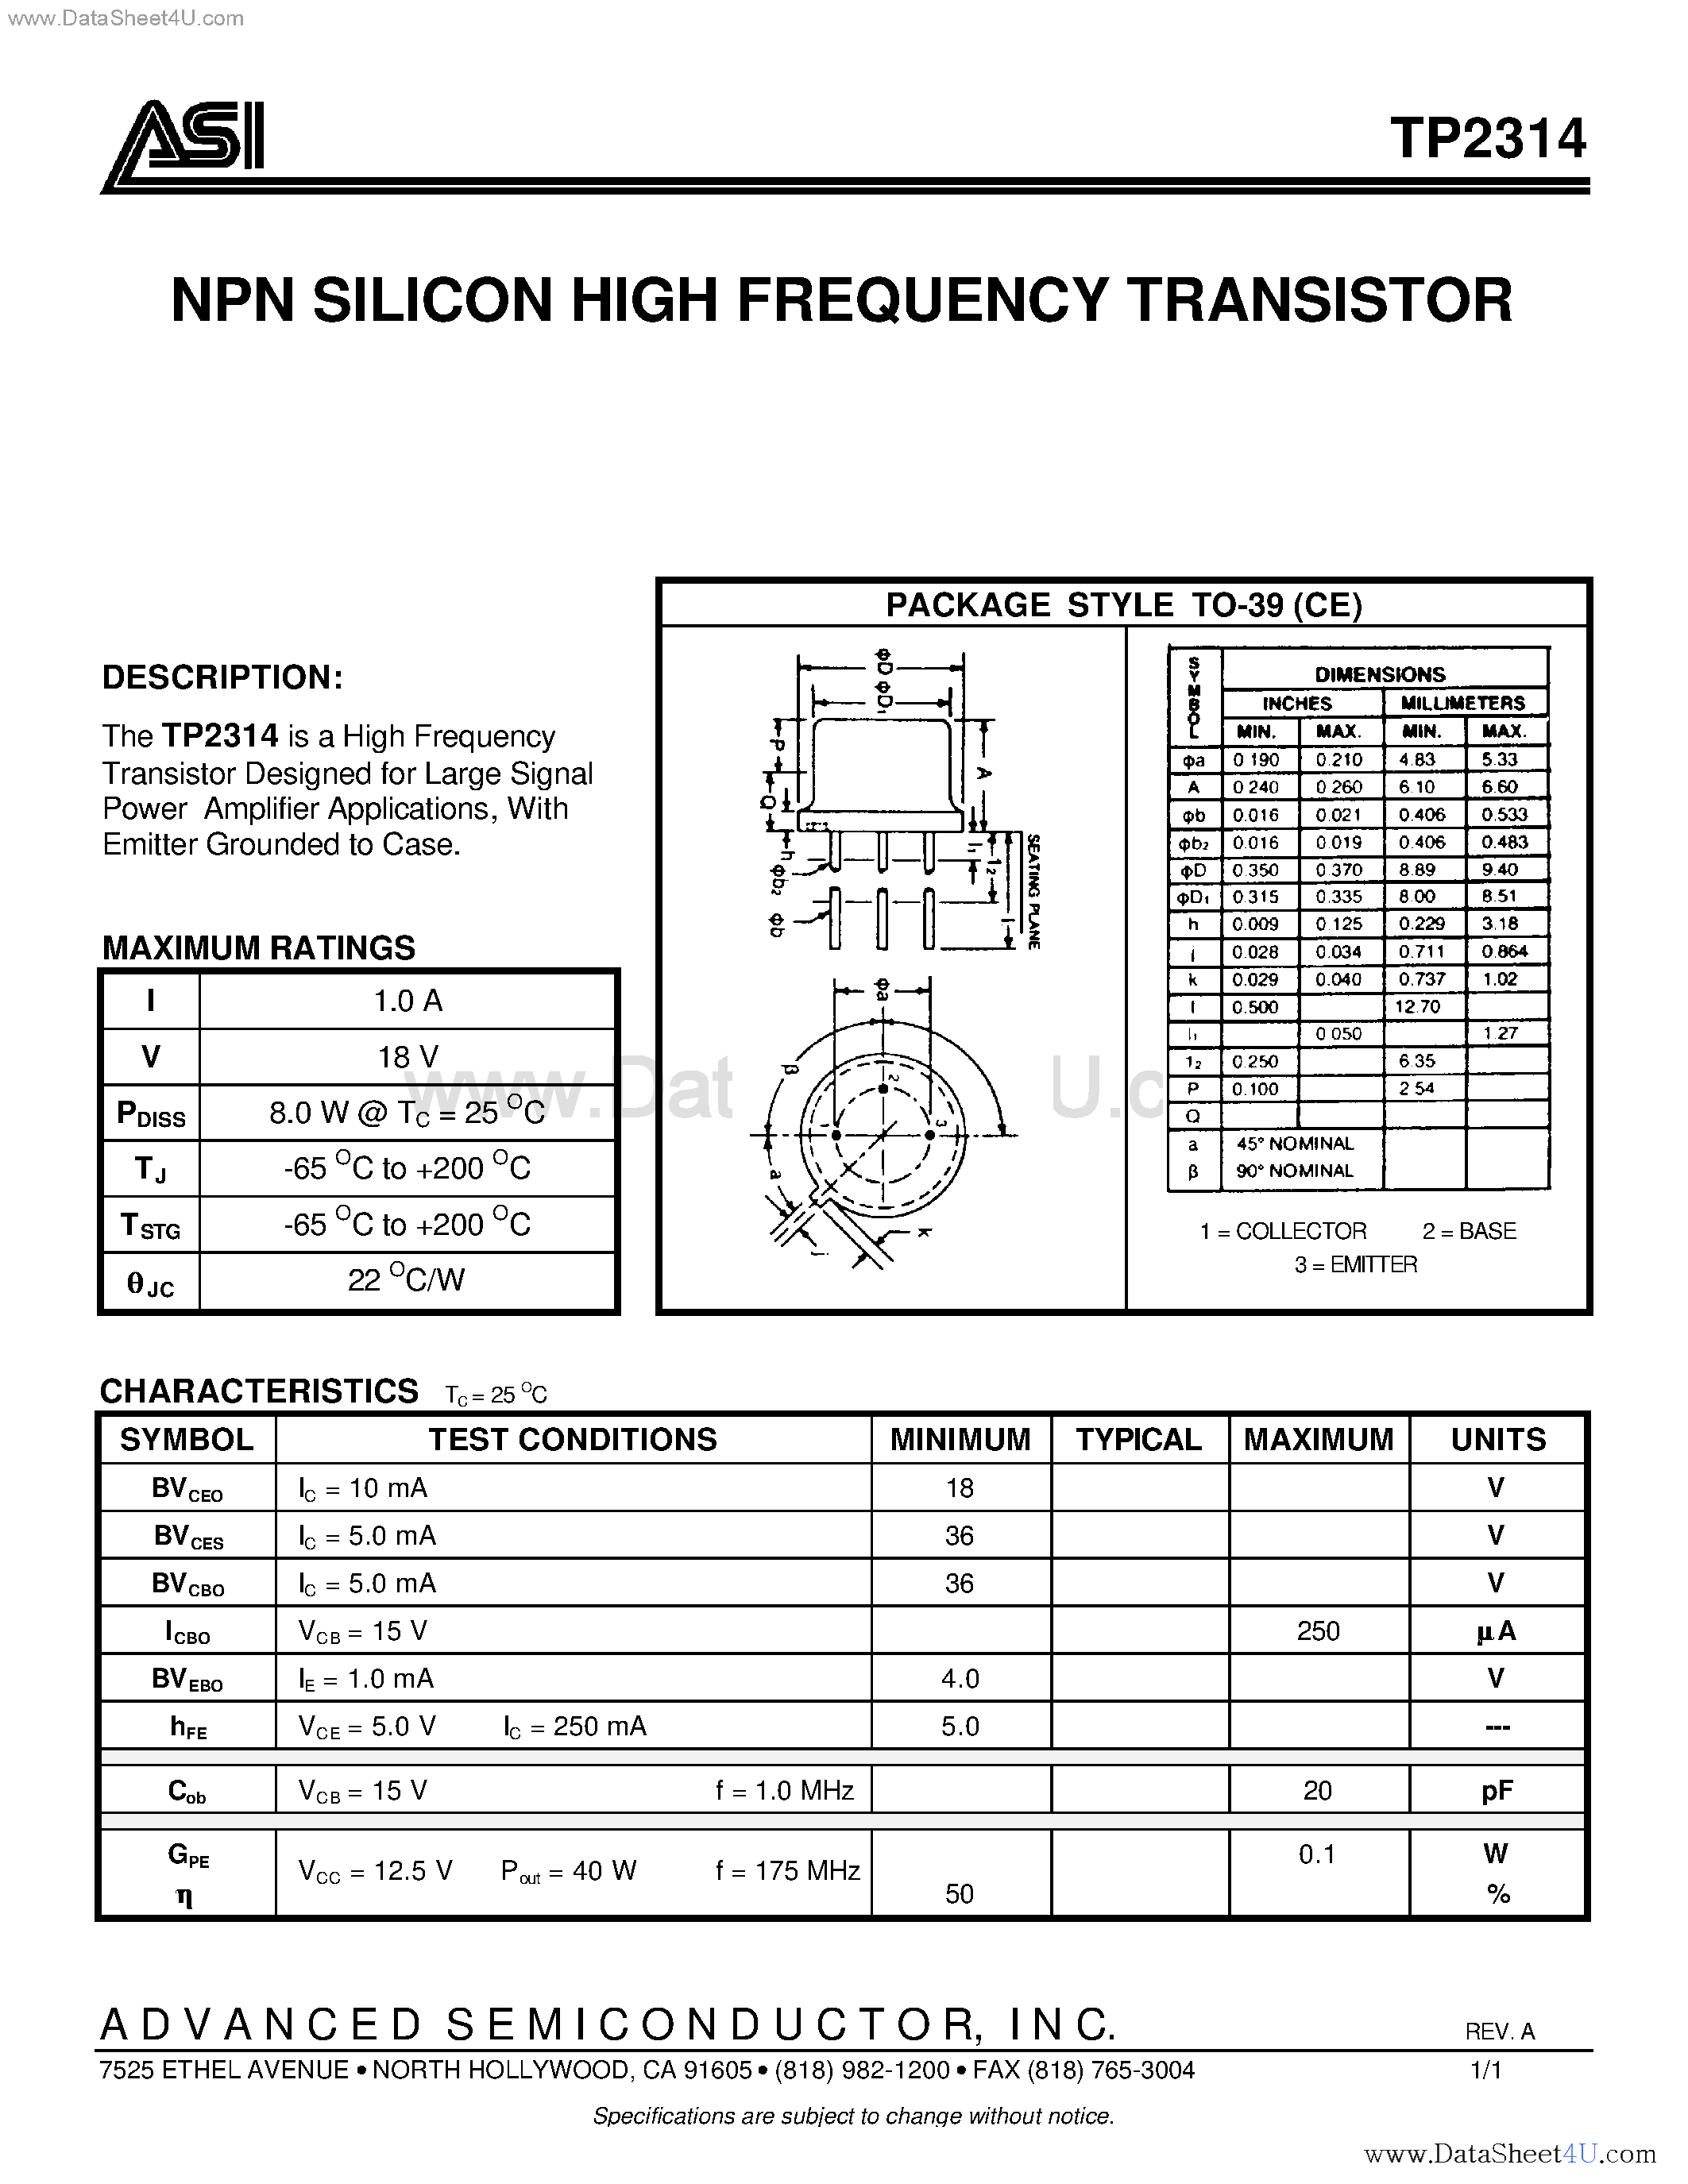 Даташит TP2314 - NPN SILICON HIGH FREQUENCY TRANSISTOR страница 1